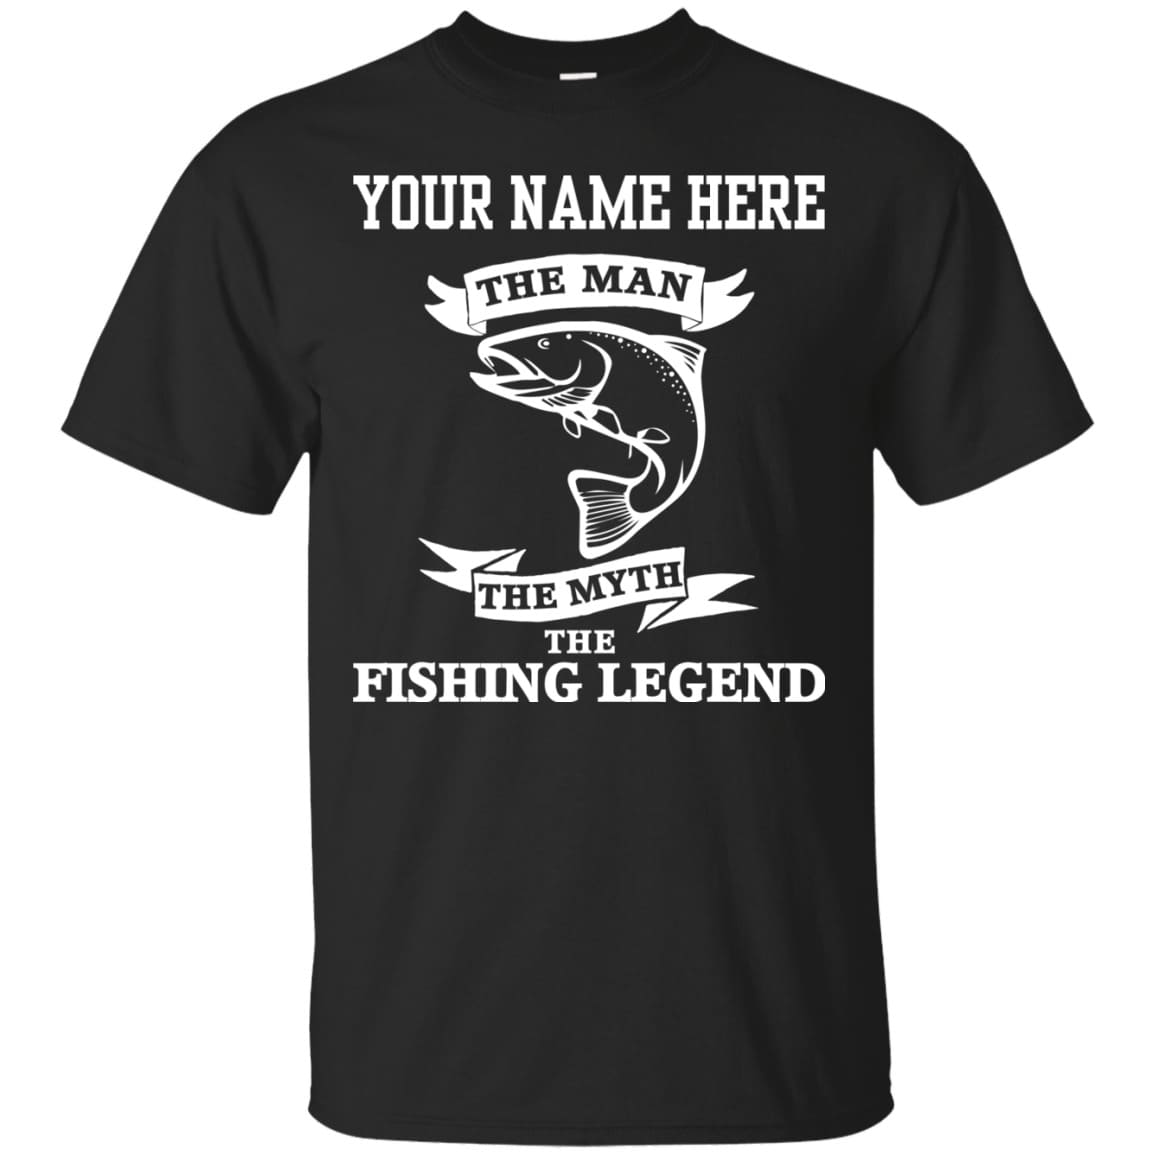 Personalized the man the myth the legend t-shirt a black